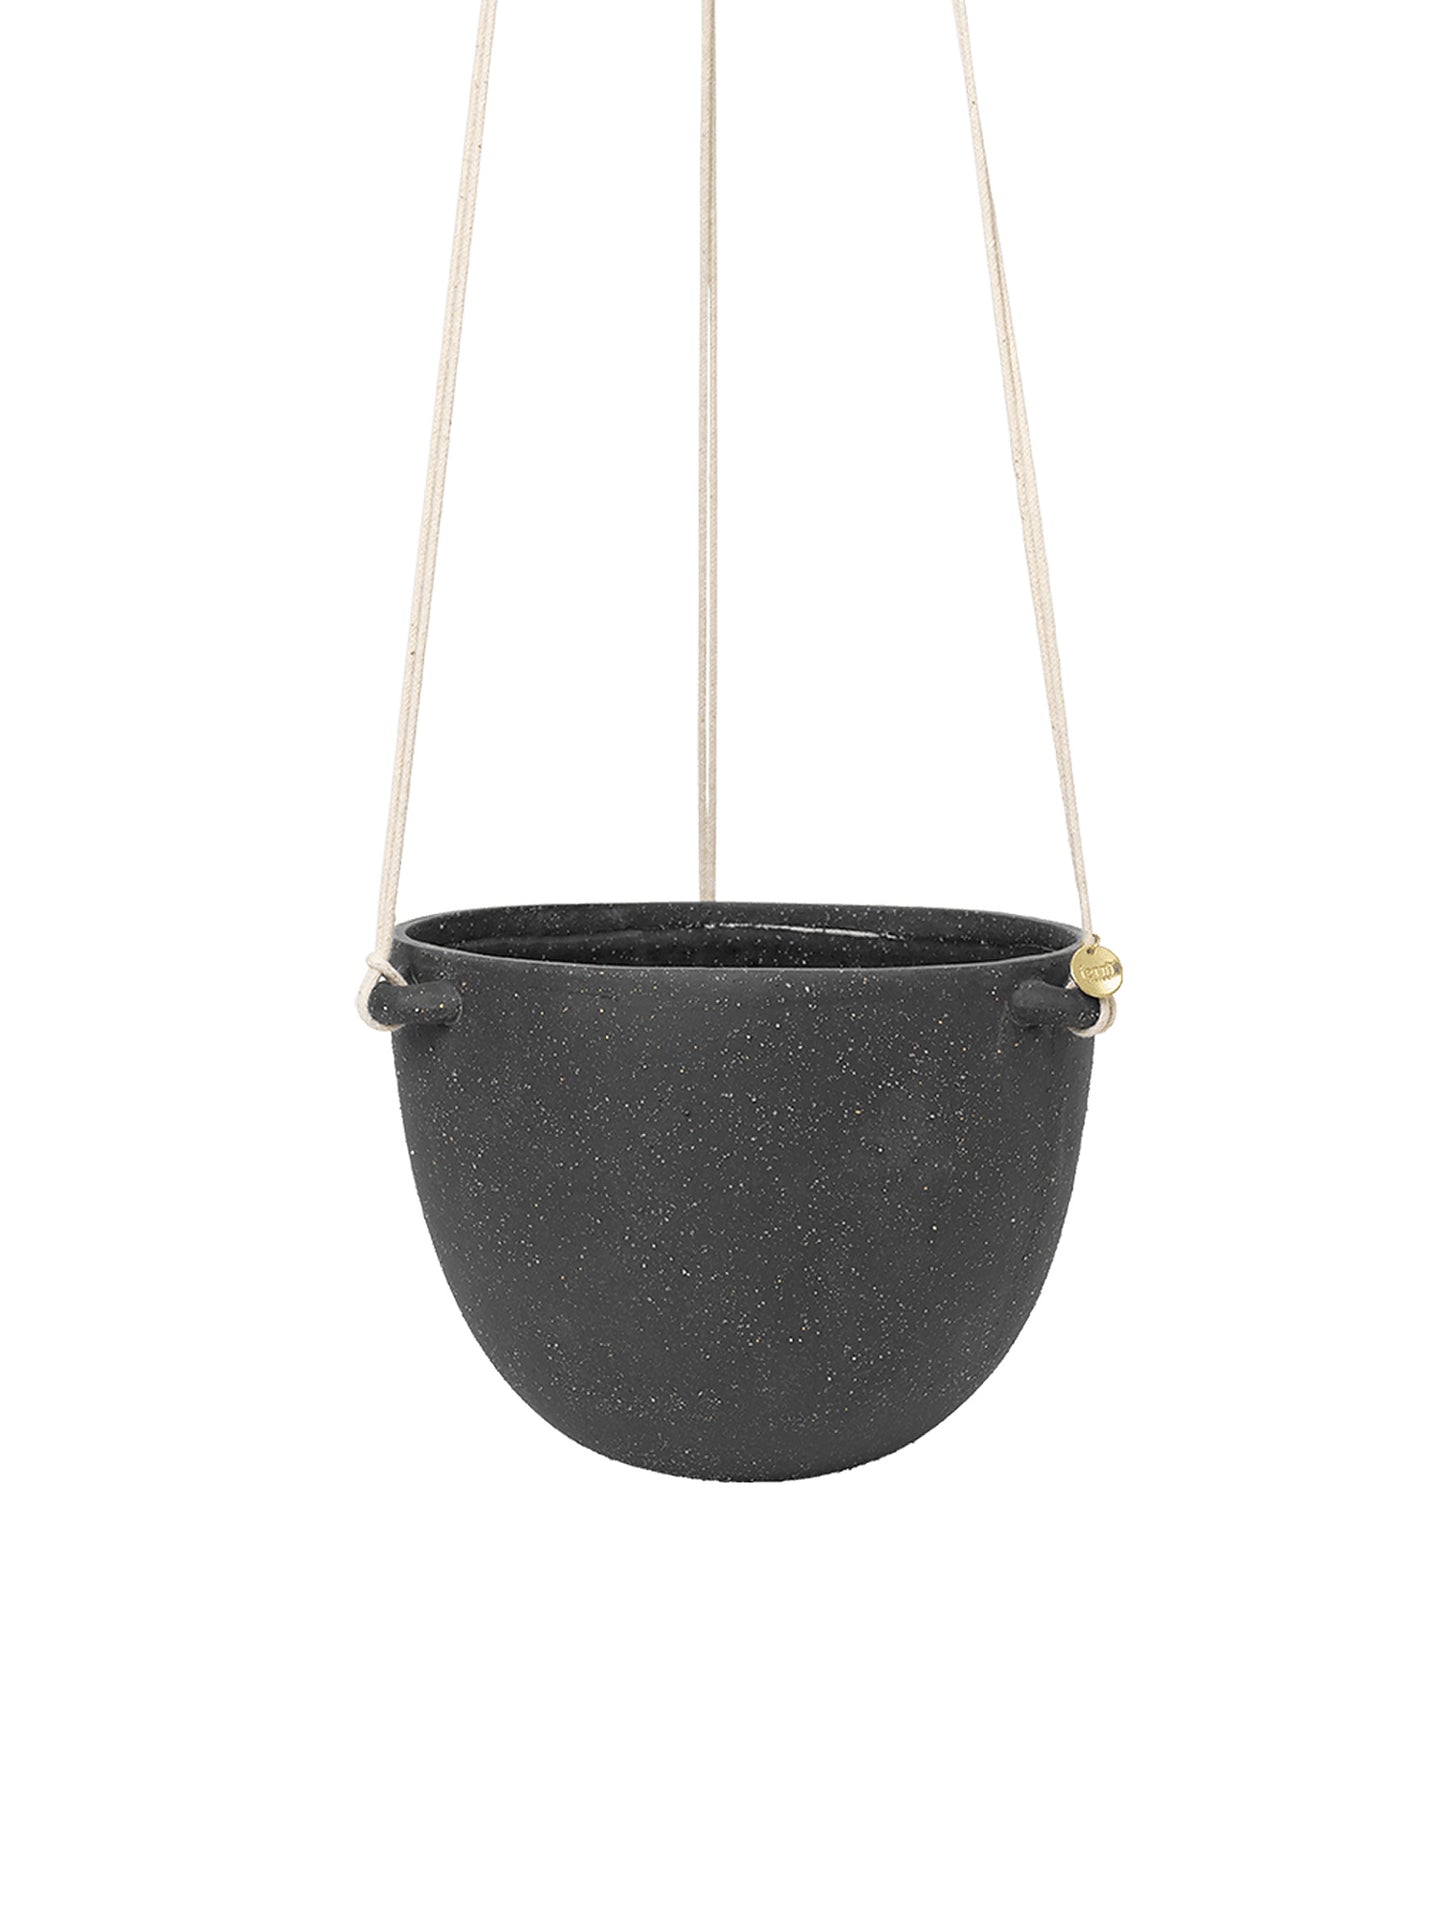  Large Speckle Hanging Pot in Dark Grey by Ferm Living